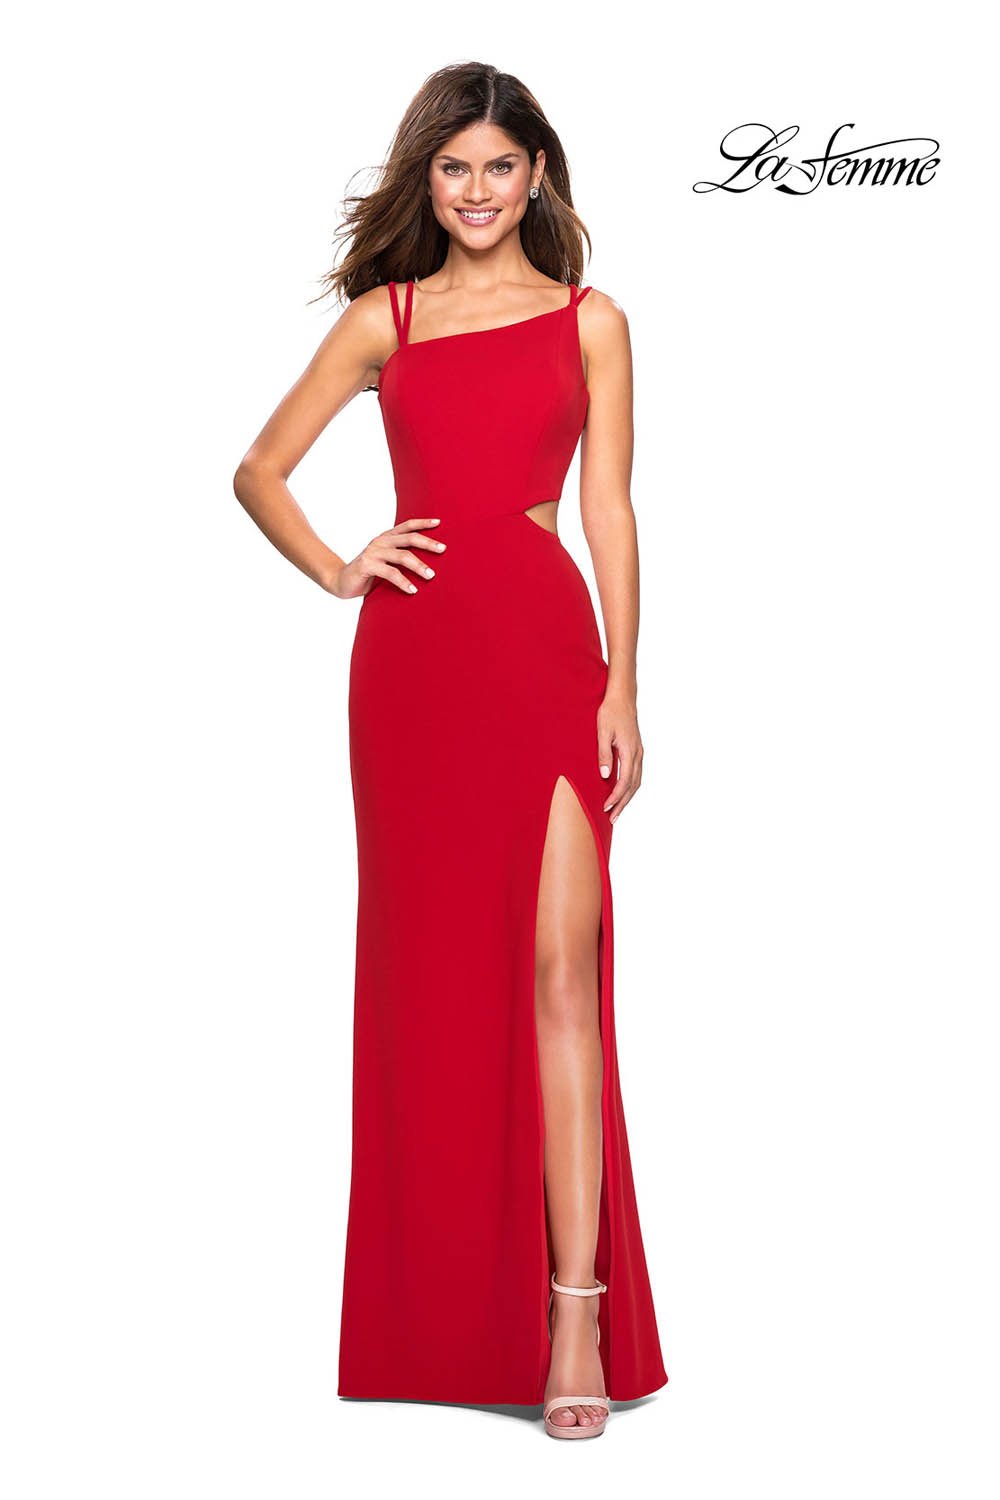 La Femme 27126 dress images in these colors: Black, Red, Royal Blue, White, Yellow.